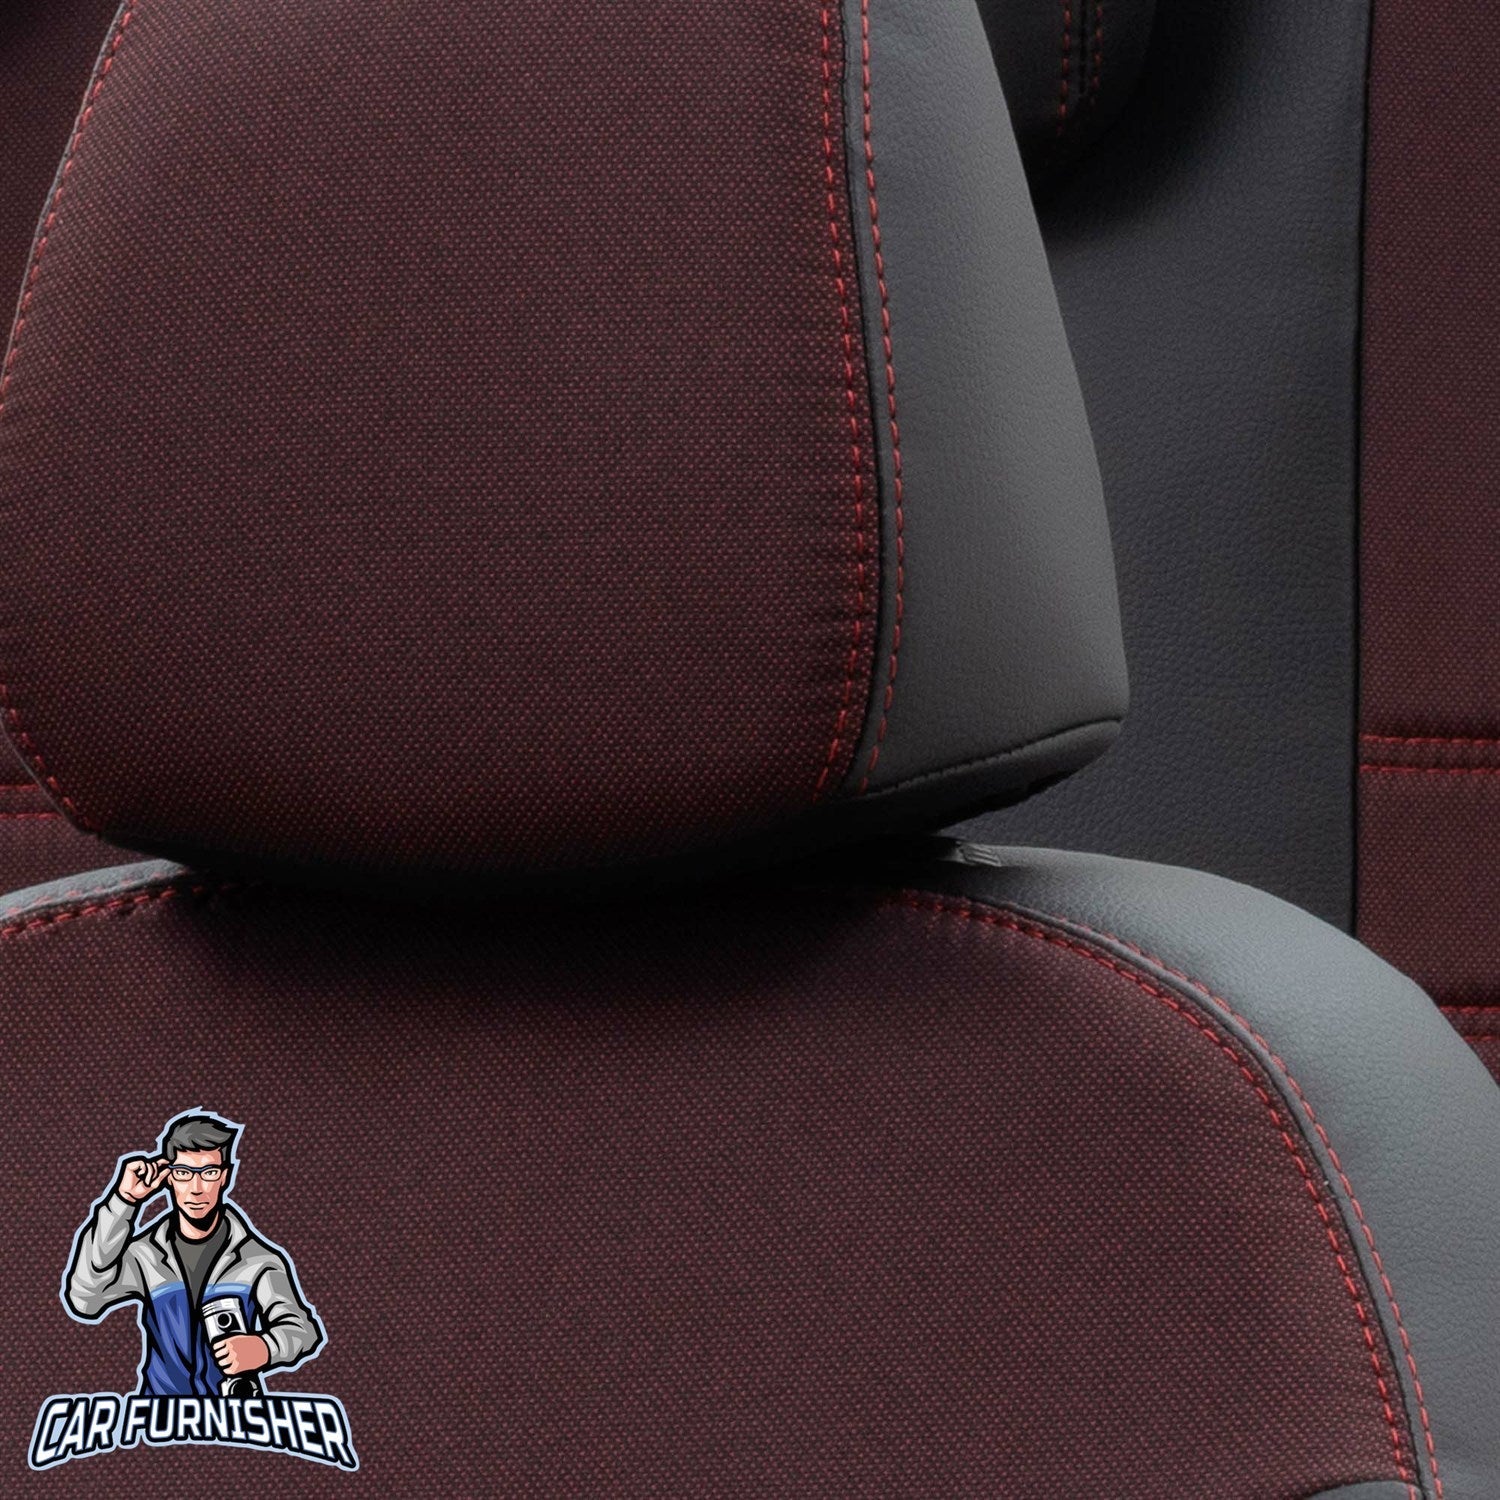 VW Caddy Car Seat Cover 2004-2023 2K/2KN Paris Design Red Leather & Fabric